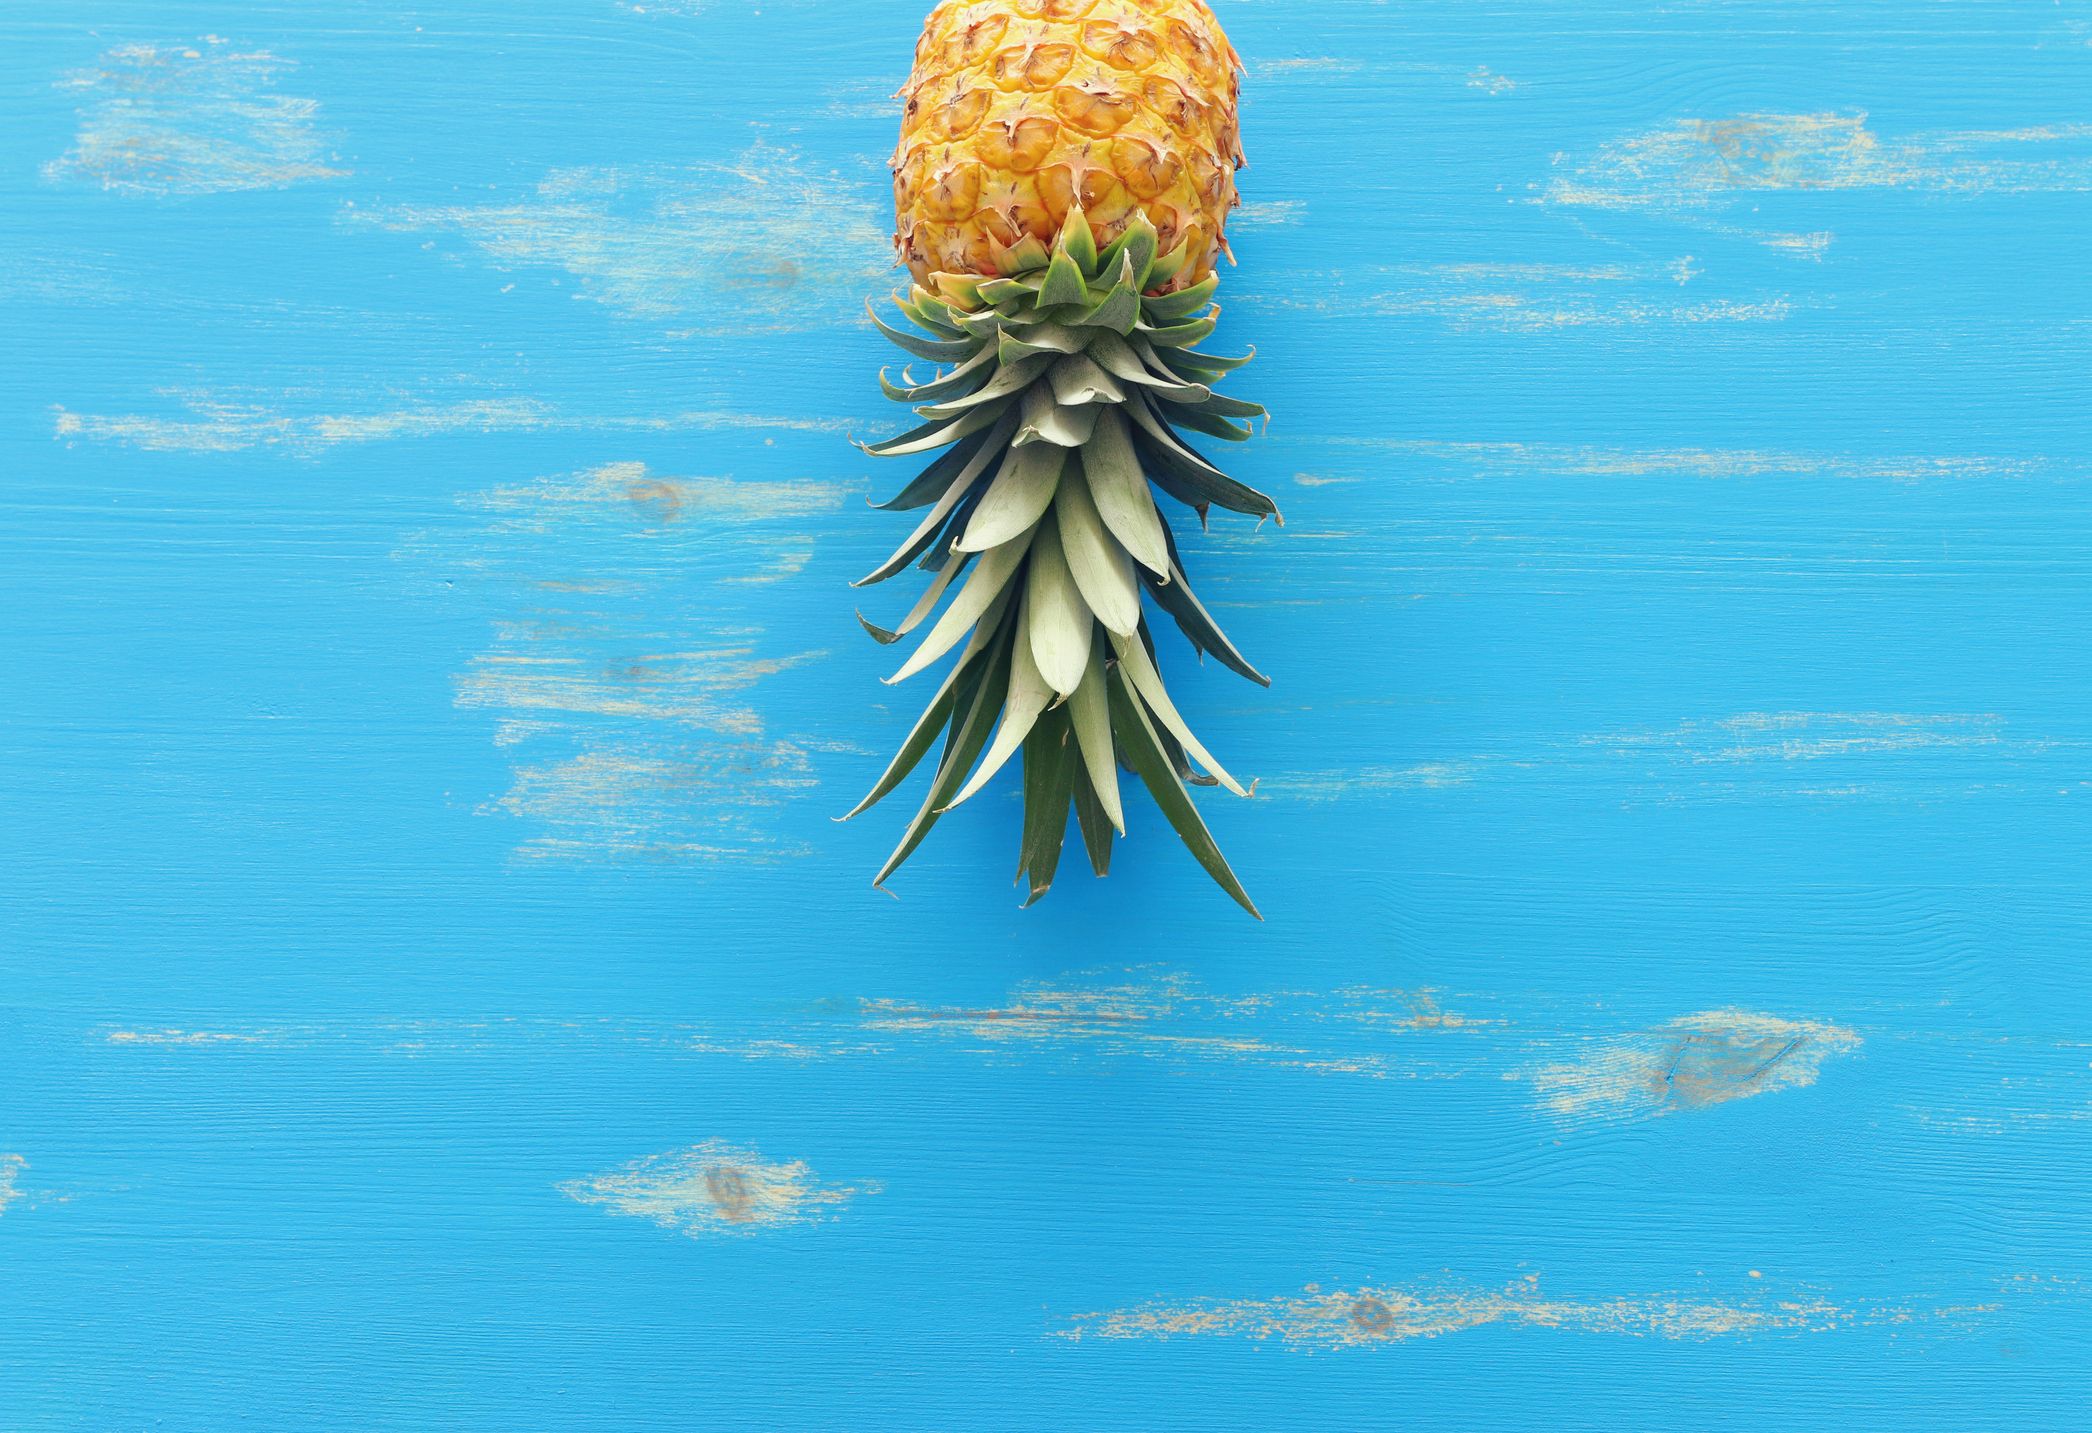 The Upside-Down Pineapple Has a Secret, Sexy Meaning image